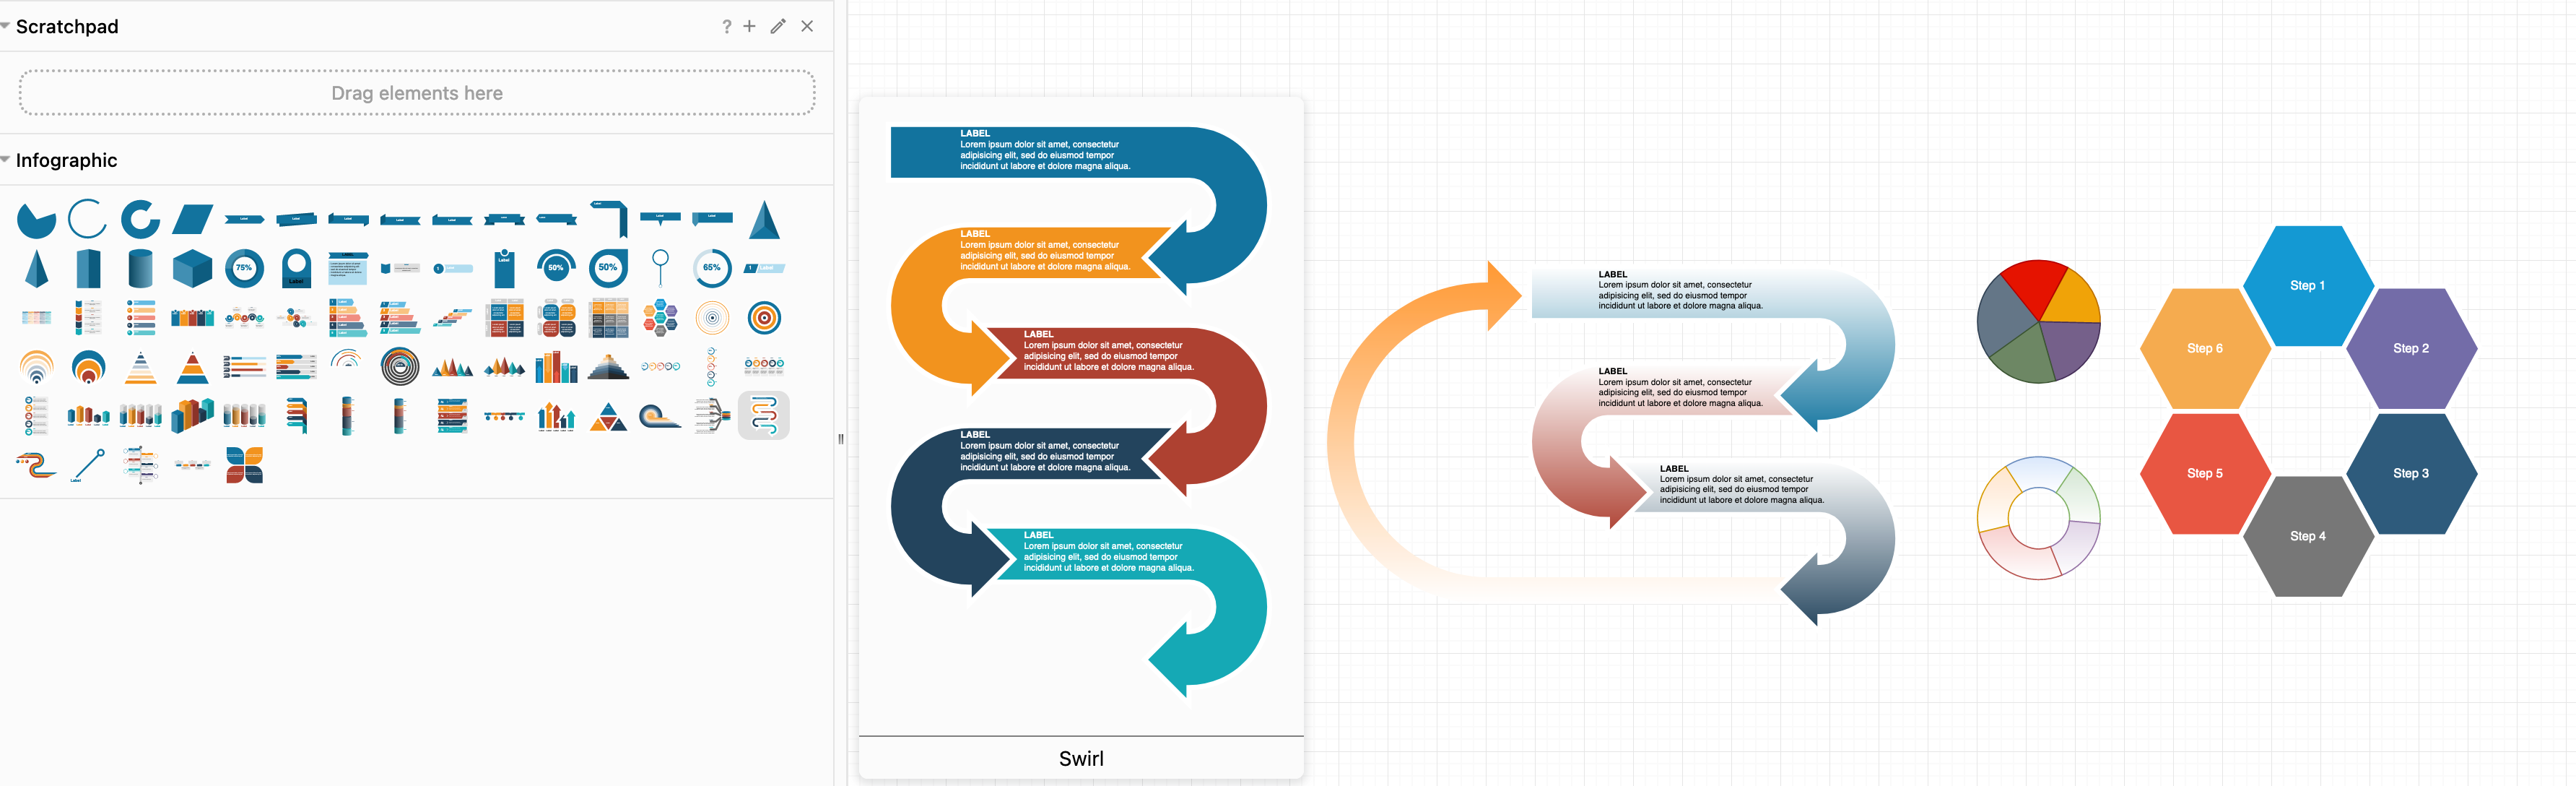 Create your own circular flowchart from shapes in the infographic shape library in diagrams.net